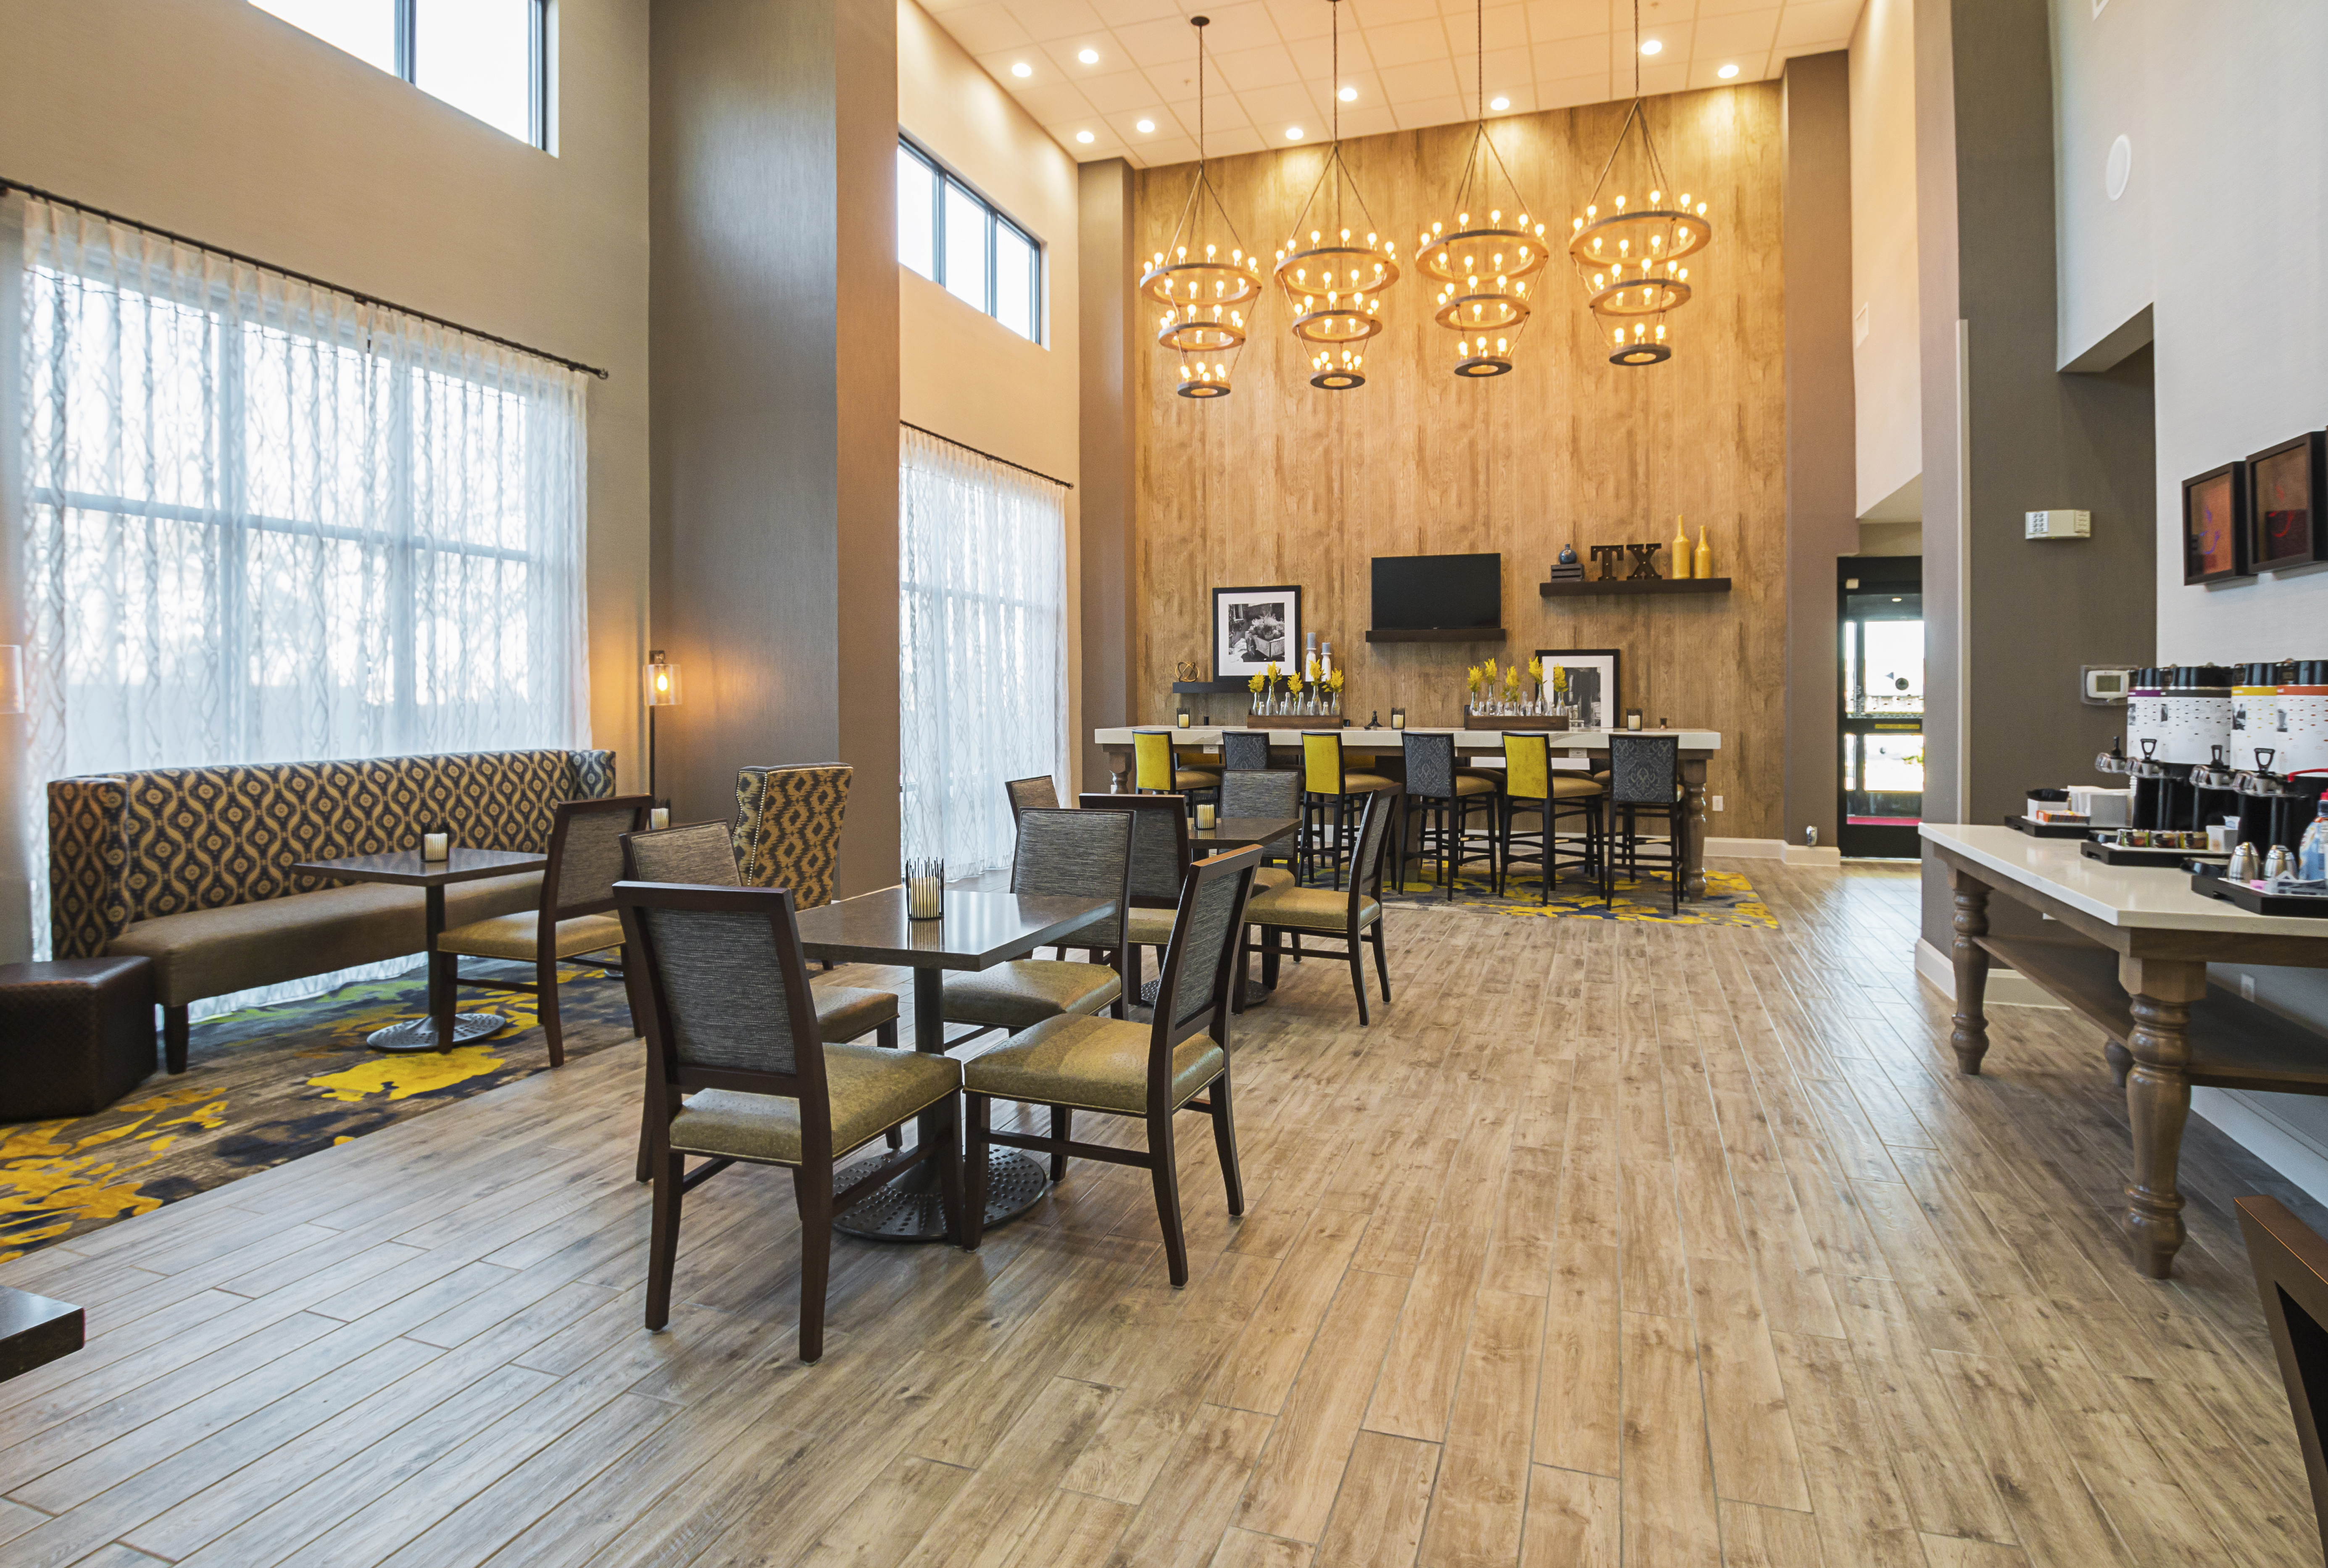 DFW hotel breakfast seating area with
  high ceilings and plenty of natural lighting